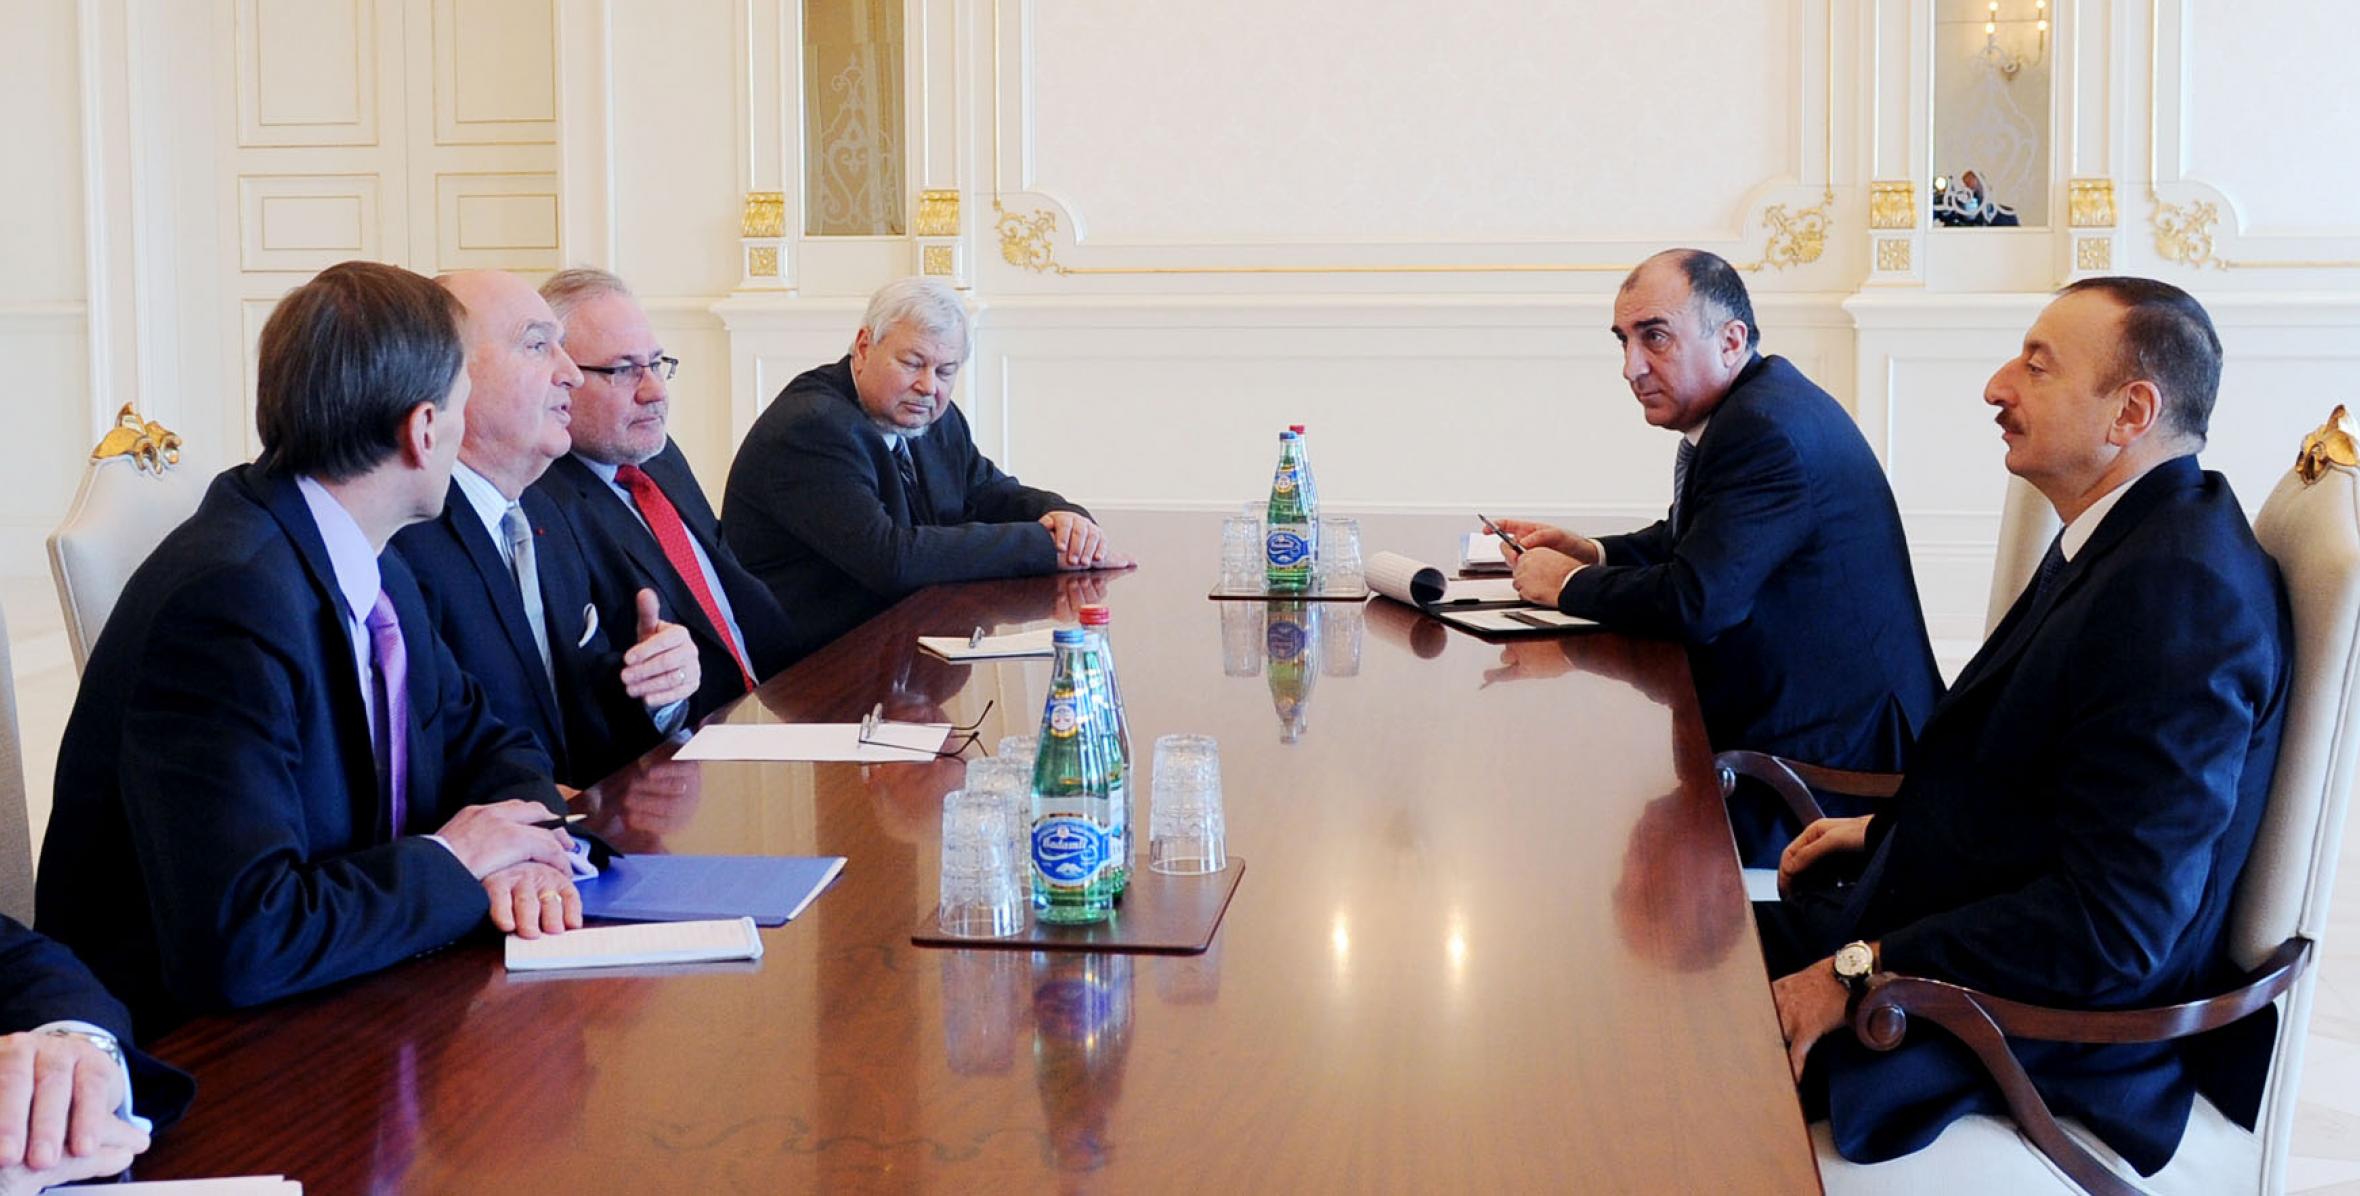 Ilham Aliyev received co-chairs of the OSCE Minsk Group and the special representative of the OSCE chairman-in-office